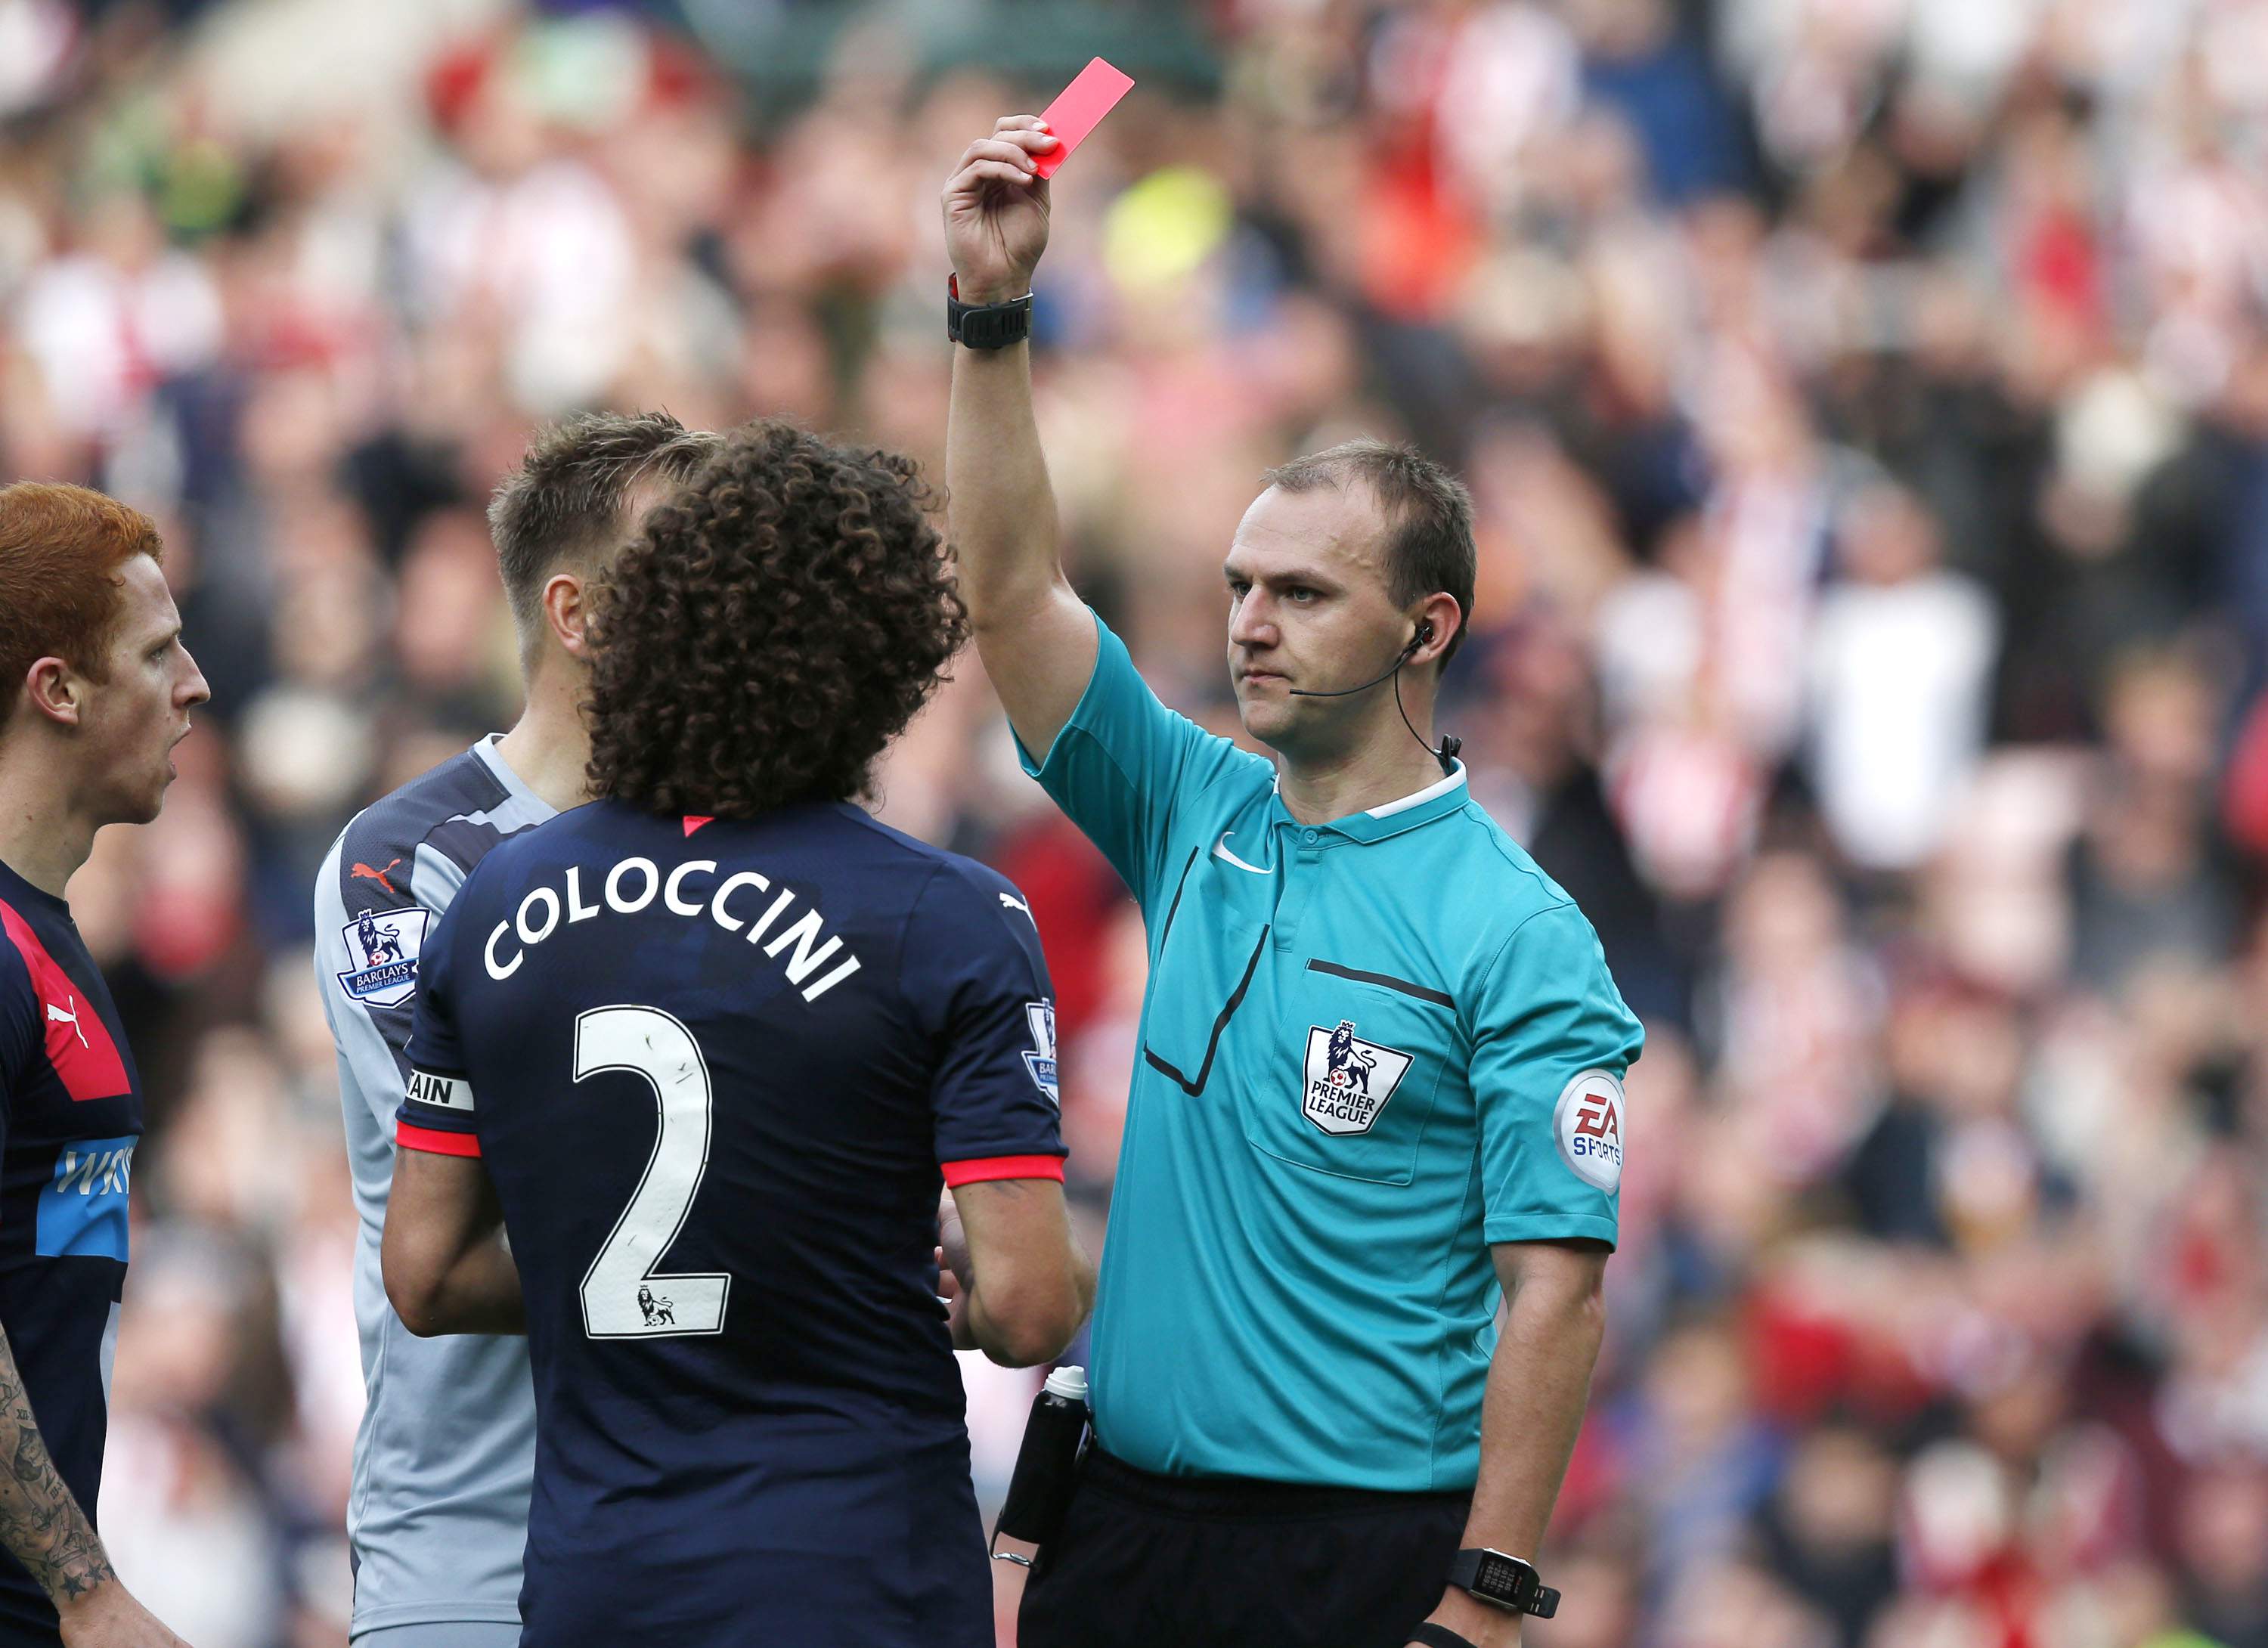 Football - Sunderland v Newcastle United - Barclays Premier League - Stadium of Light - 25/10/15 Newcastle's Fabricio Coloccini is sent off by referee Robert Madley Reuters / Andrew Yates Livepic EDITORIAL USE ONLY. No use with unauthorized audio, video, data, fixture lists, club/league logos or "live" services. Online in-match use limited to 45 images, no video emulation. No use in betting, games or single club/league/player publications.  Please contact your account representative for further details.